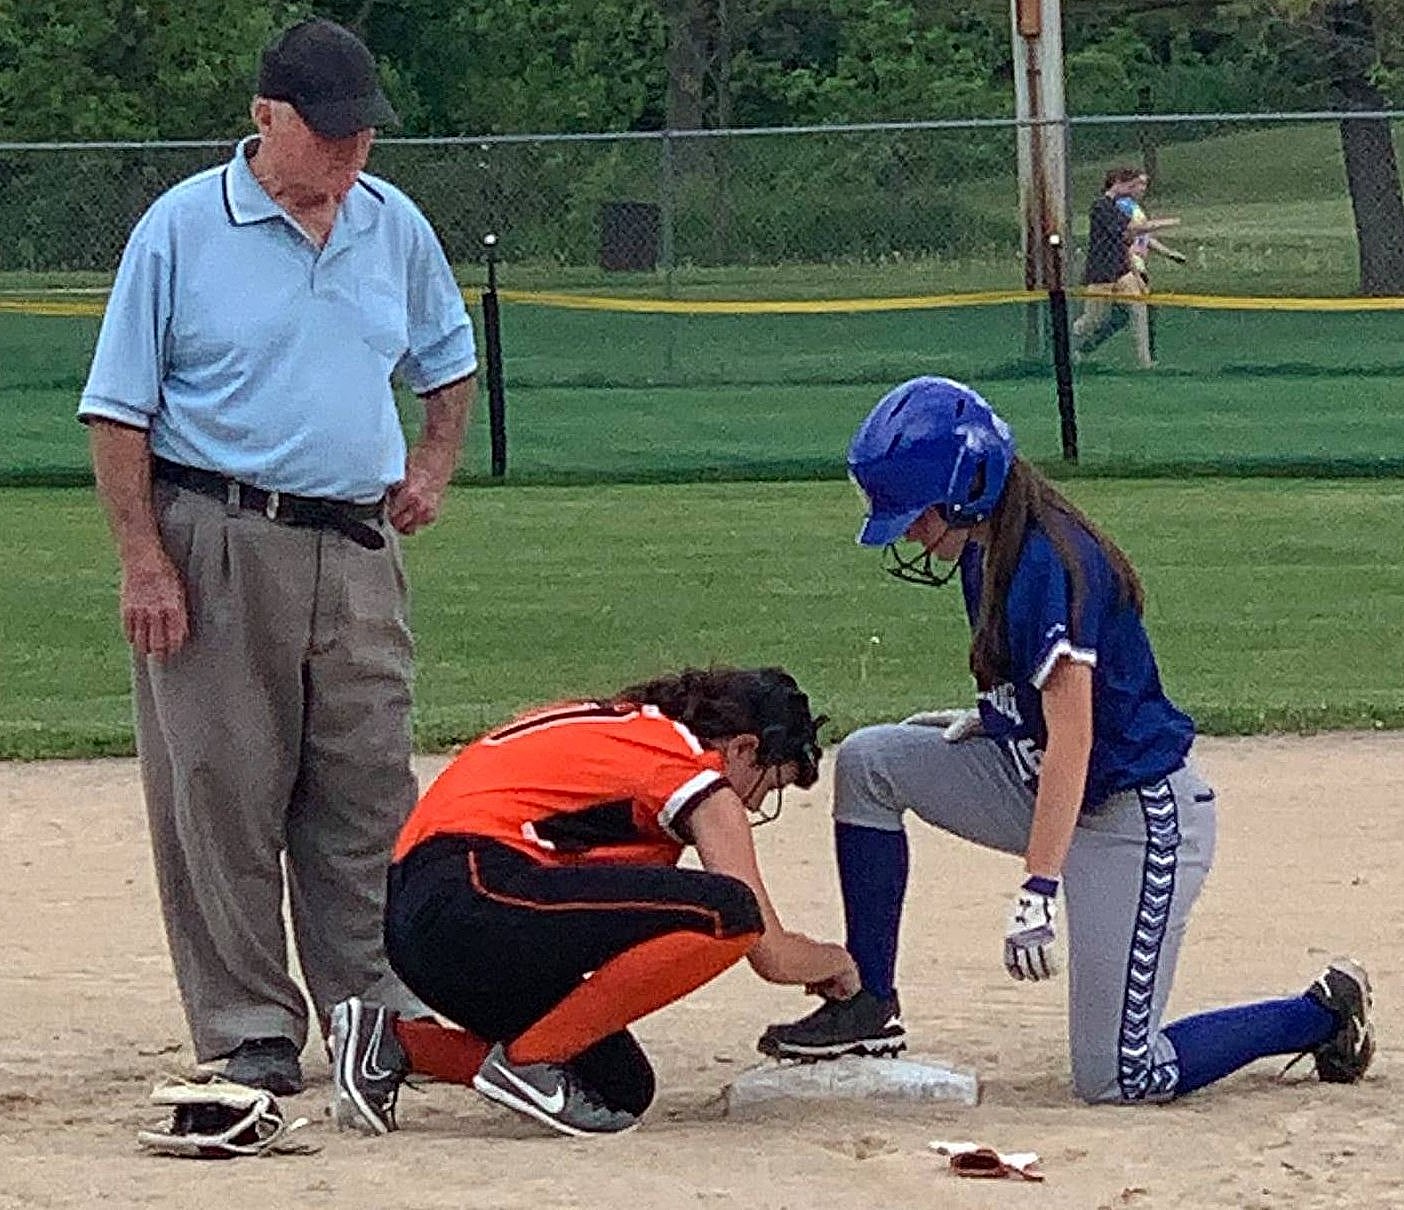 Coaches and Parents Can Learn From This Durand Softball Picture